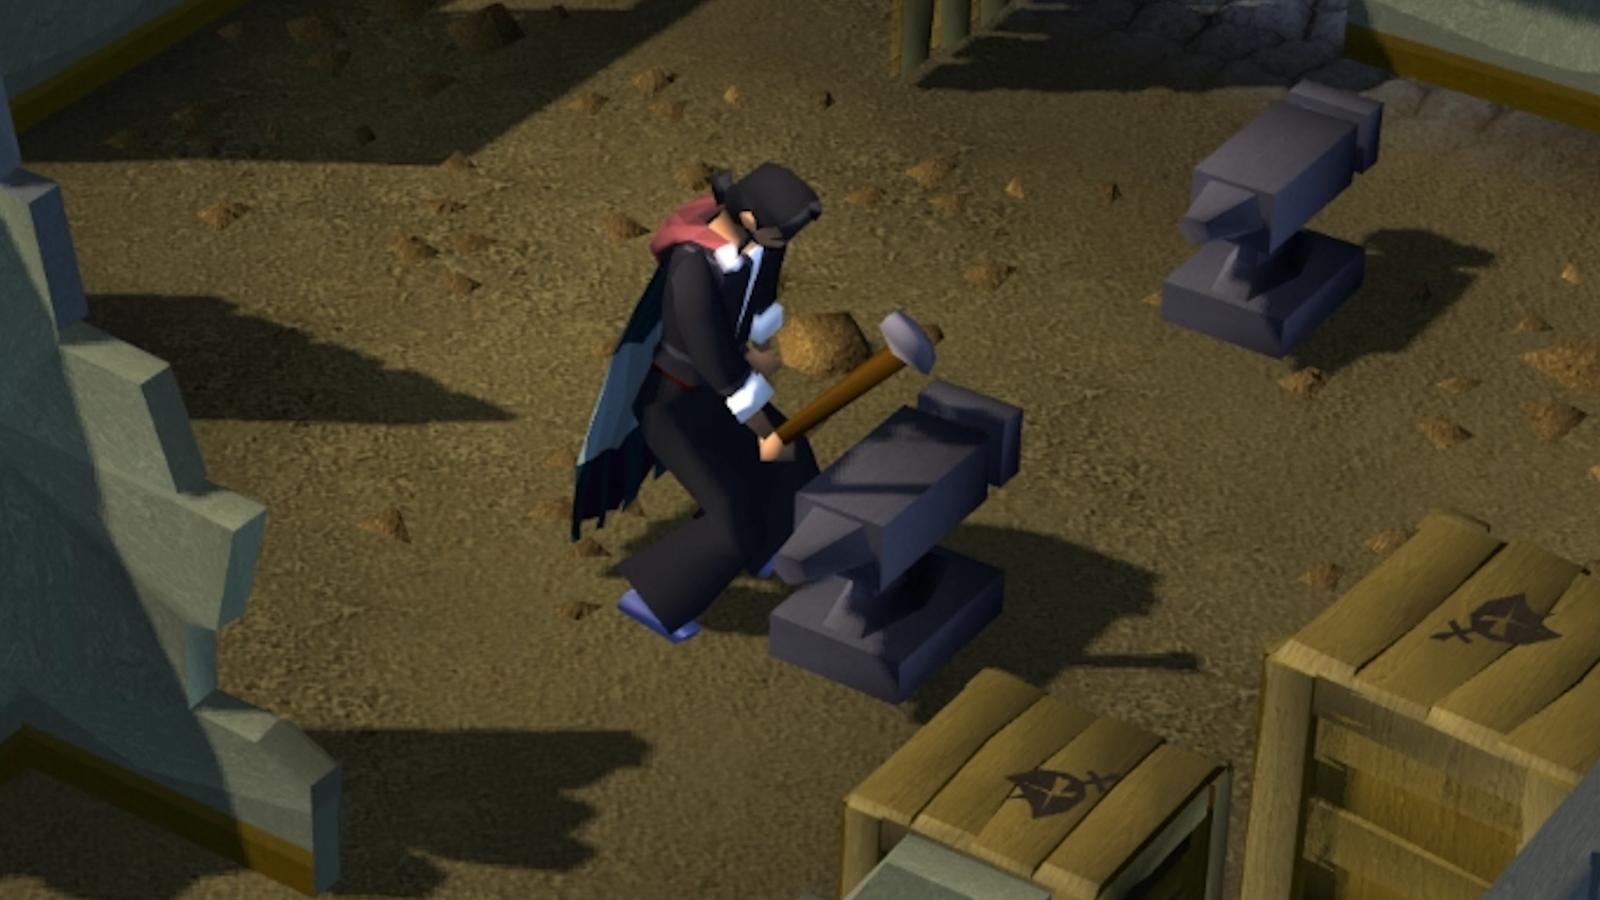 Character smithing at Varrock anvil in Old School RuneScape.